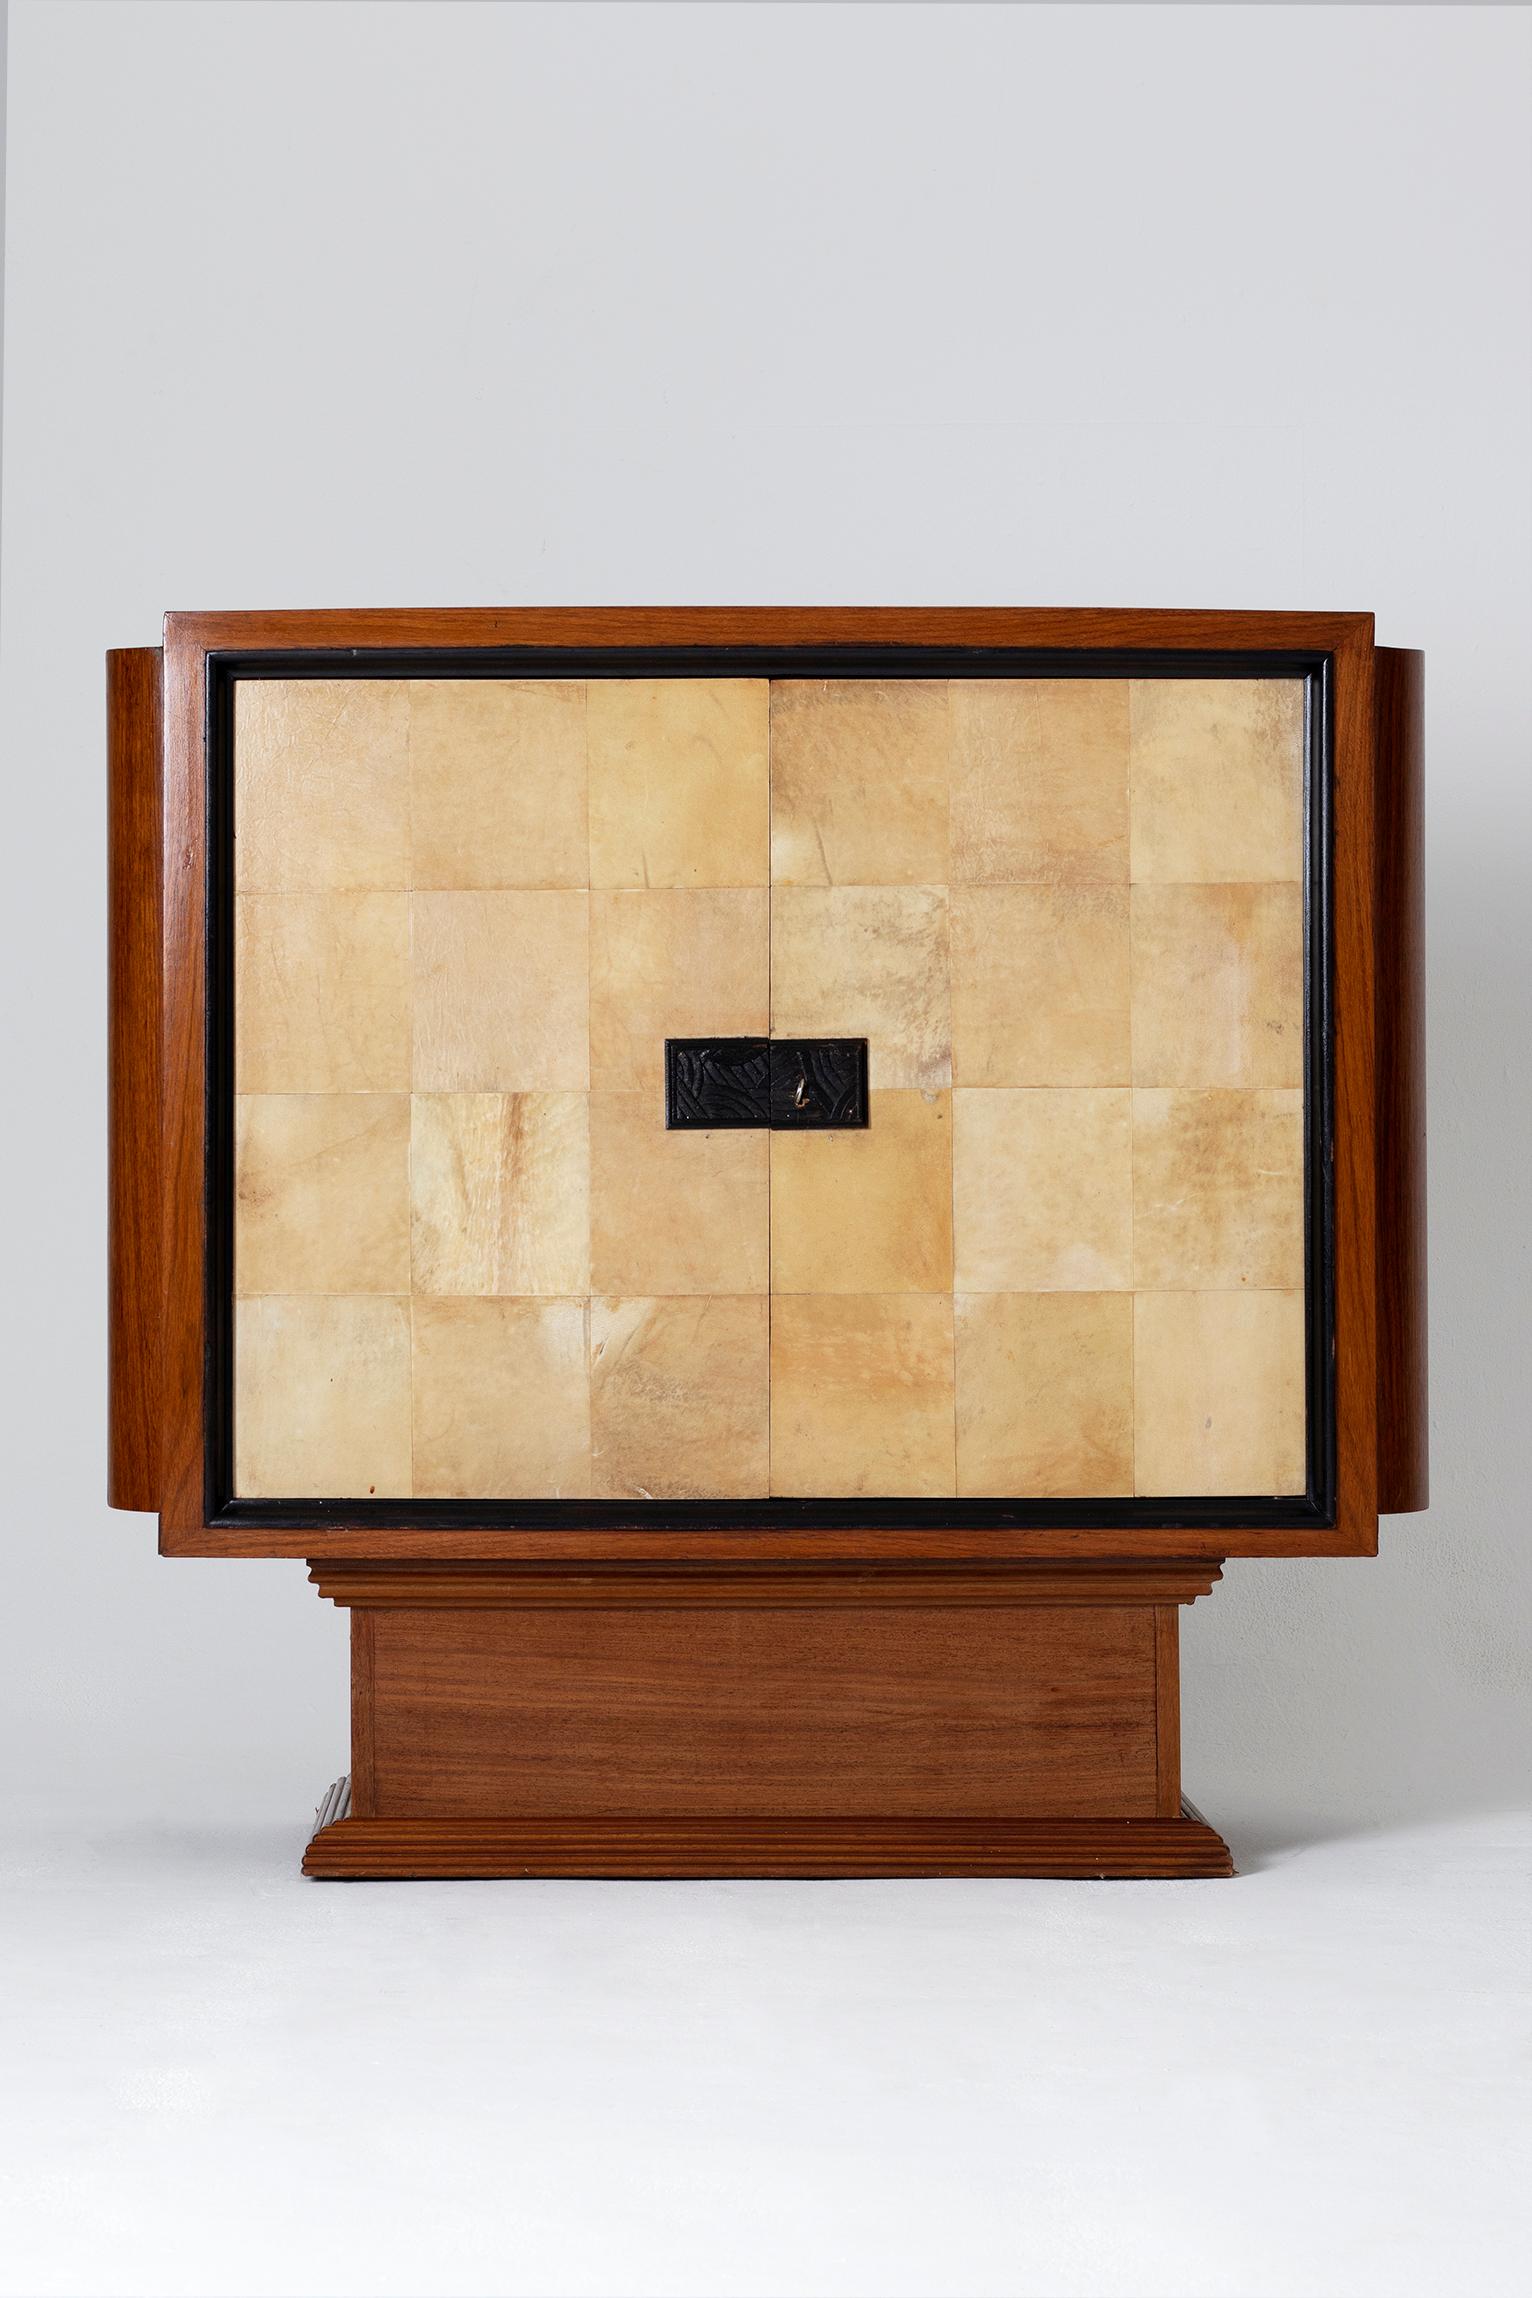 An Art Deco mahogany and velum cabinet,
The two door clad in velum revealing a shelf and a drawers, adorned with geometric marquetry and clad in velum.
France, circa 1930.